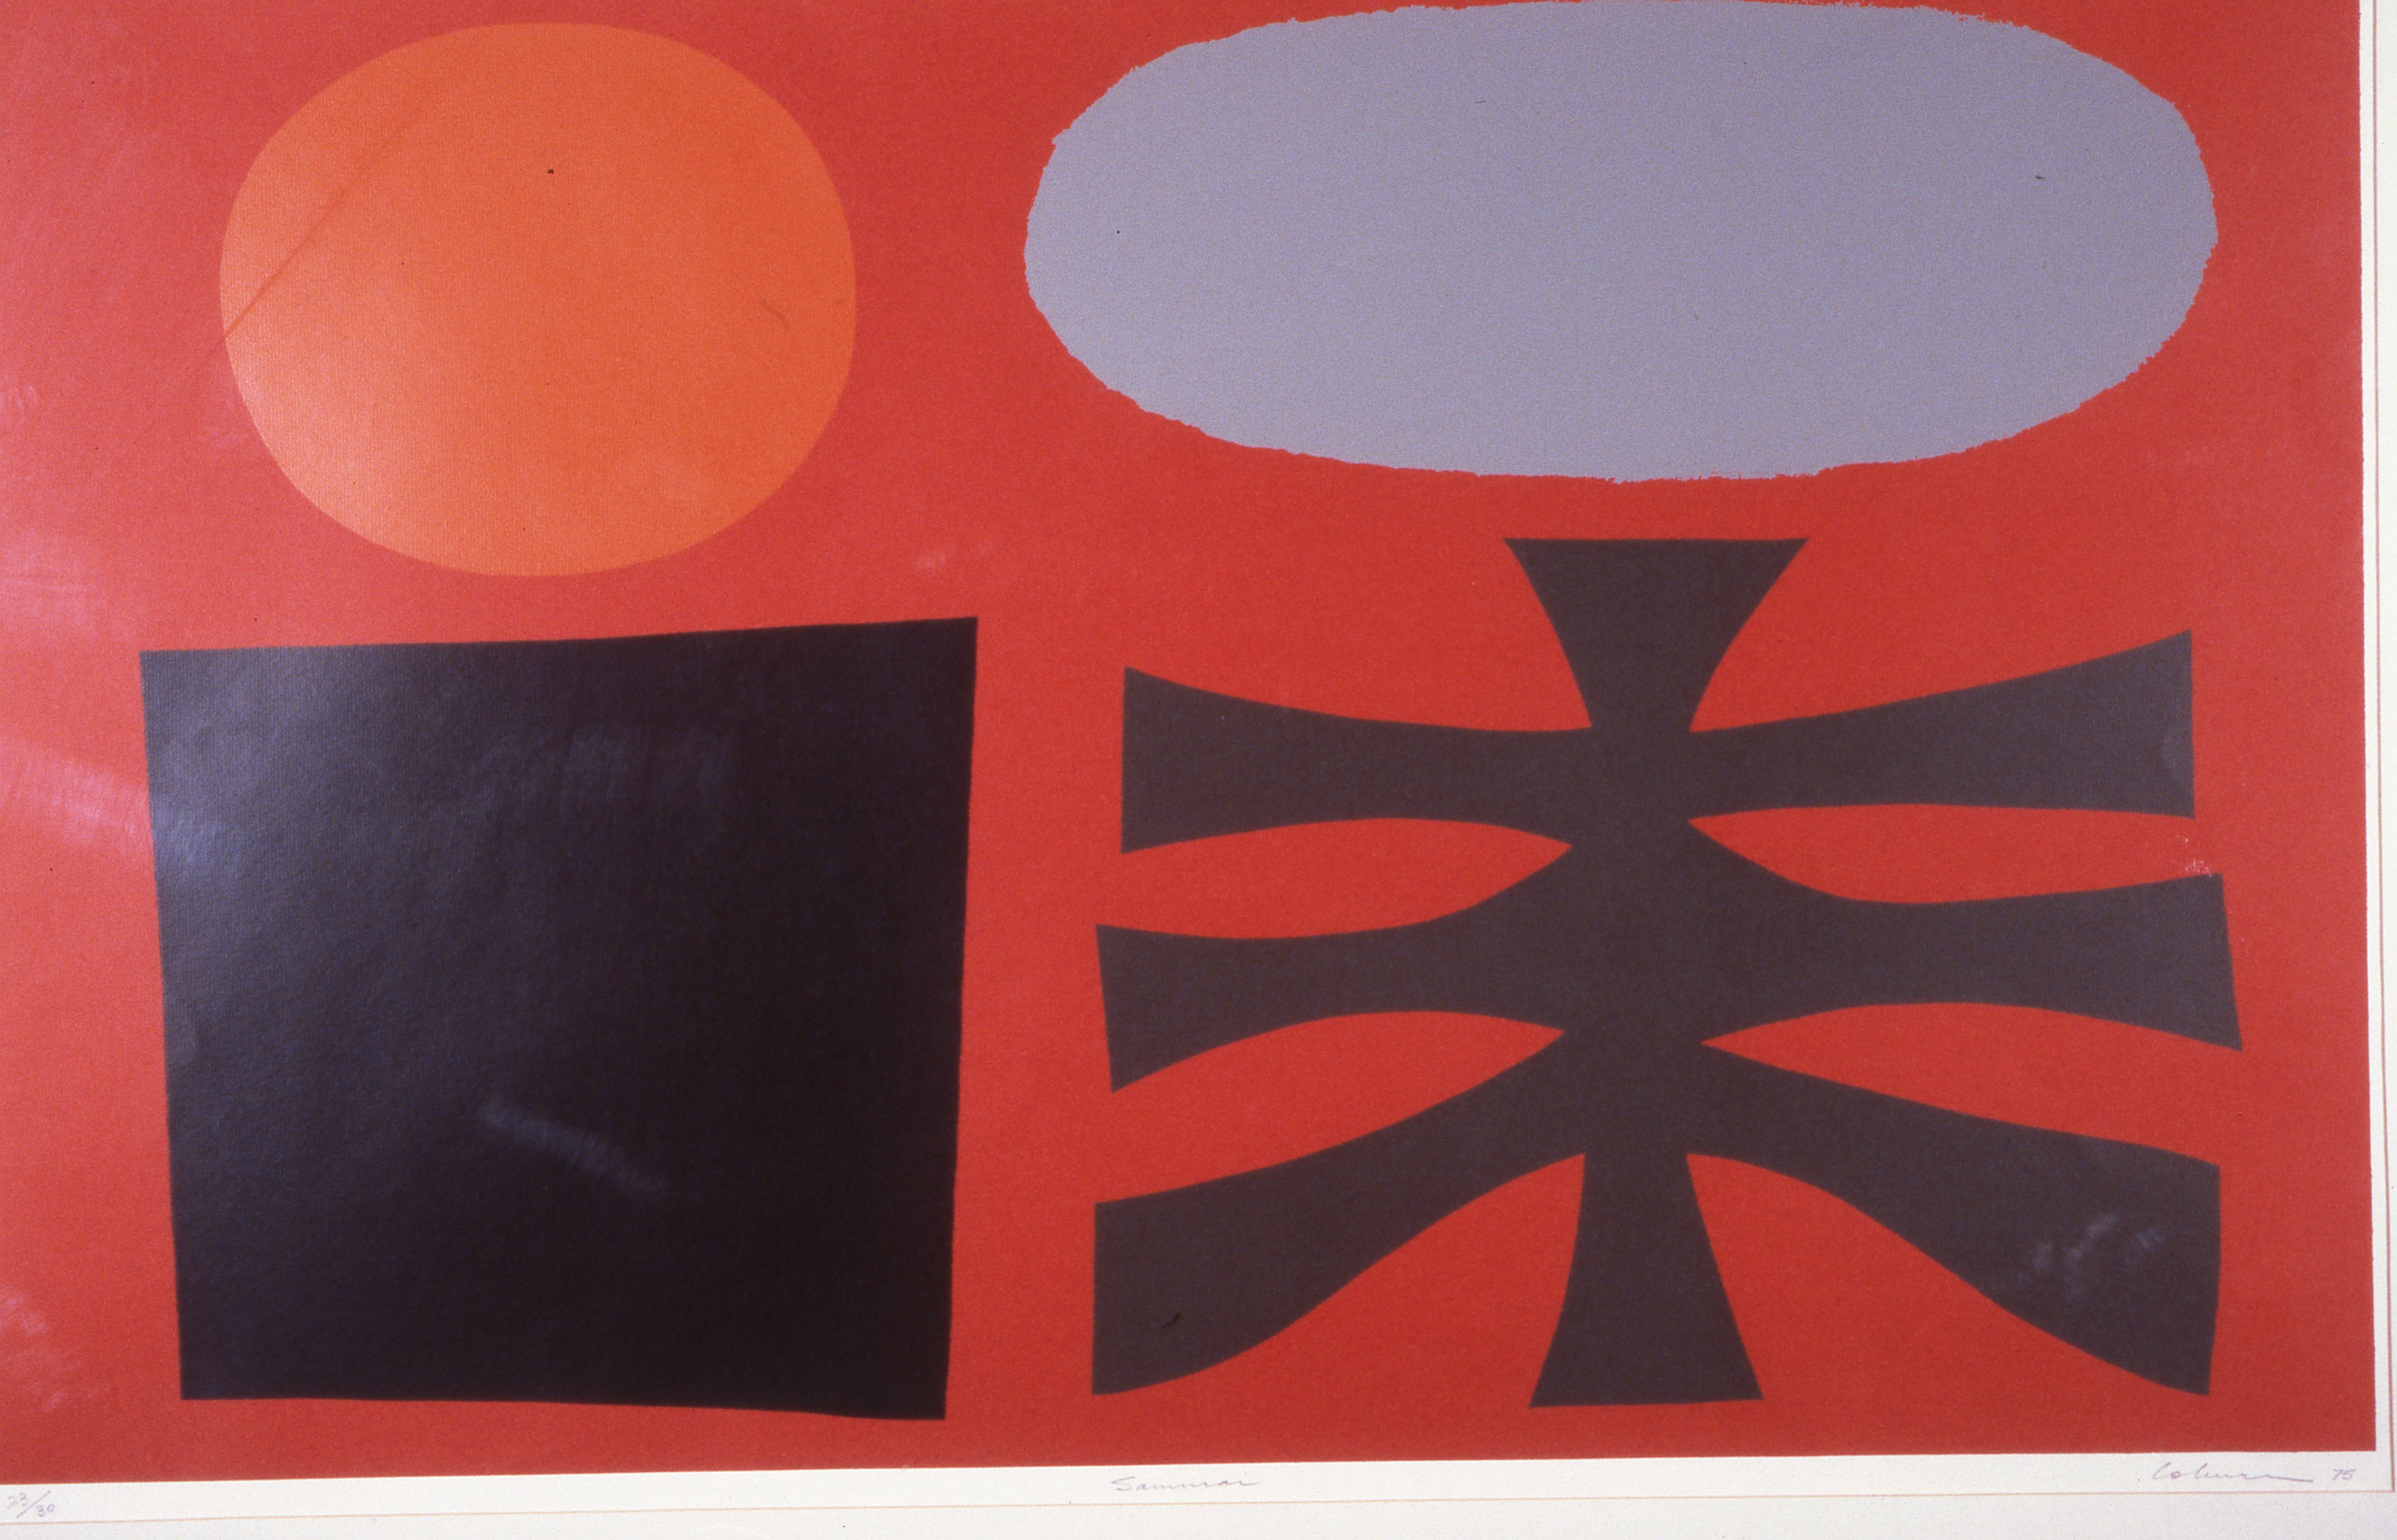 idg_archive_1987_prints_and_printmakers_aspects_of_a_college_collection_005_install.jpg